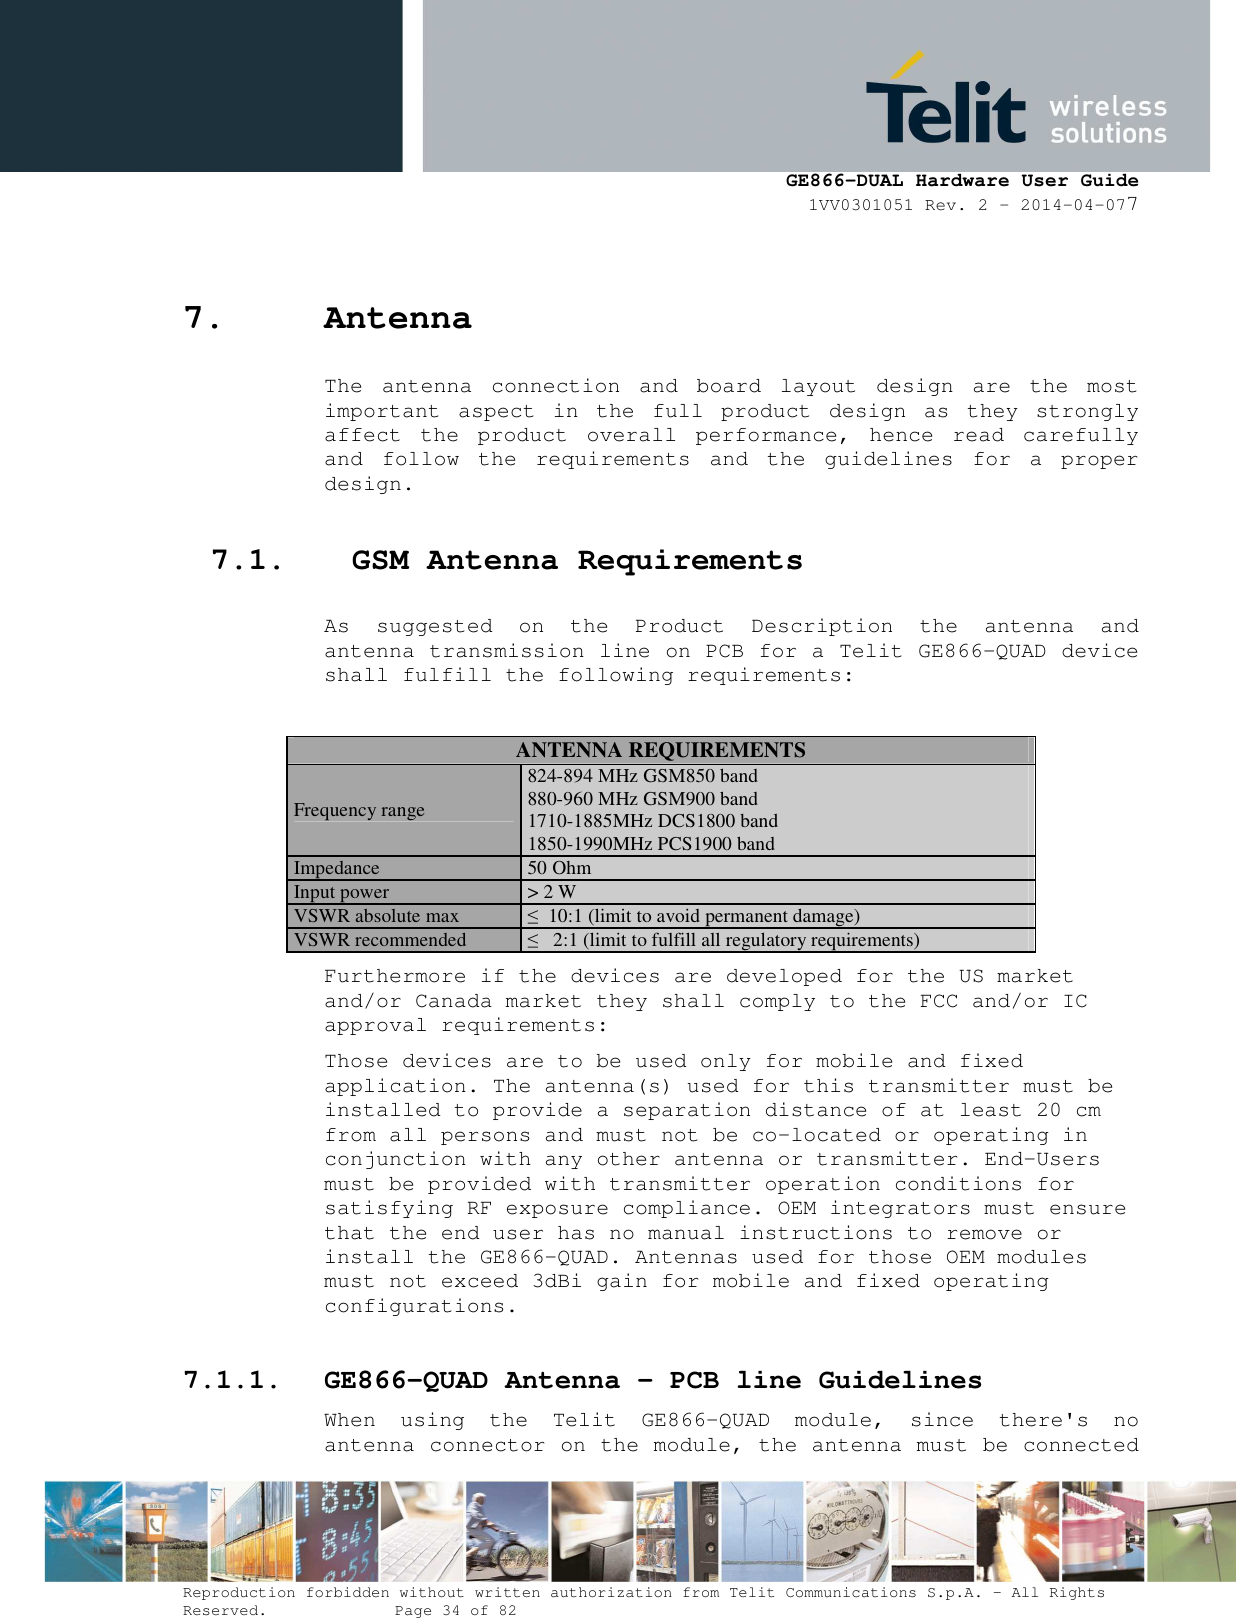      GE866-DUAL Hardware User Guide 1VV0301051 Rev. 2 – 2014-04-077  Reproduction forbidden without written authorization from Telit Communications S.p.A. - All Rights Reserved.    Page 34 of 82 Mod. 0805 2011-07 Rev.2 7. Antenna The  antenna  connection  and  board  layout  design  are  the  most important  aspect  in  the  full  product  design  as  they  strongly affect  the  product  overall  performance,  hence  read  carefully and  follow  the  requirements  and  the  guidelines  for  a  proper design. 7.1. GSM Antenna Requirements As  suggested  on  the  Product  Description  the  antenna  and antenna transmission line on PCB for a Telit GE866-QUAD device shall fulfill the following requirements:  ANTENNA REQUIREMENTS Frequency range 824-894 MHz GSM850 band 880-960 MHz GSM900 band  1710-1885MHz DCS1800 band  1850-1990MHz PCS1900 band Impedance 50 Ohm Input power &gt; 2 W  VSWR absolute max  ≤  10:1 (limit to avoid permanent damage) VSWR recommended  ≤   2:1 (limit to fulfill all regulatory requirements) Furthermore if the devices are developed for the US market and/or Canada market they shall comply to the FCC and/or IC approval requirements: Those devices are to be used only for mobile and fixed application. The antenna(s) used for this transmitter must be installed to provide a separation distance of at least 20 cm from all persons and must not be co-located or operating in conjunction with any other antenna or transmitter. End-Users must be provided with transmitter operation conditions for satisfying RF exposure compliance. OEM integrators must ensure that the end user has no manual instructions to remove or install the GE866-QUAD. Antennas used for those OEM modules must not exceed 3dBi gain for mobile and fixed operating configurations. 7.1.1. GE866-QUAD Antenna – PCB line Guidelines When  using  the  Telit  GE866-QUAD  module,  since  there&apos;s  no antenna connector on the module, the antenna must be connected 